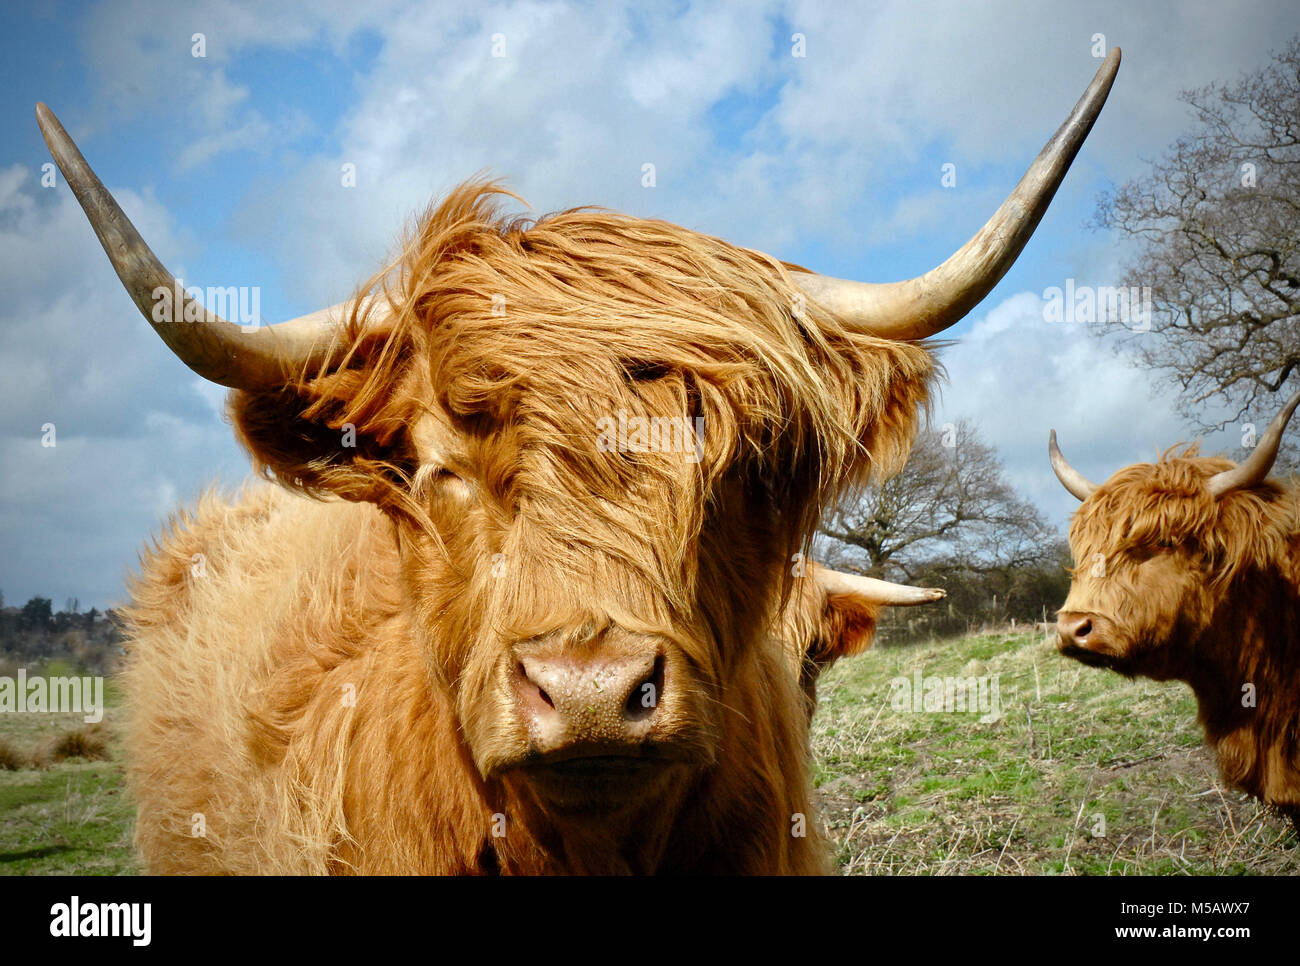 Highland cattle  - Bos taurus - their fearsome horns belie their gentle nature - Highland cattle are a Scottish cattle breed. They have long horns and long wavy coats that are coloured black, brindle, red, yellow, white, silver or dun, and they are raised primarily for their meat. Stock Photo